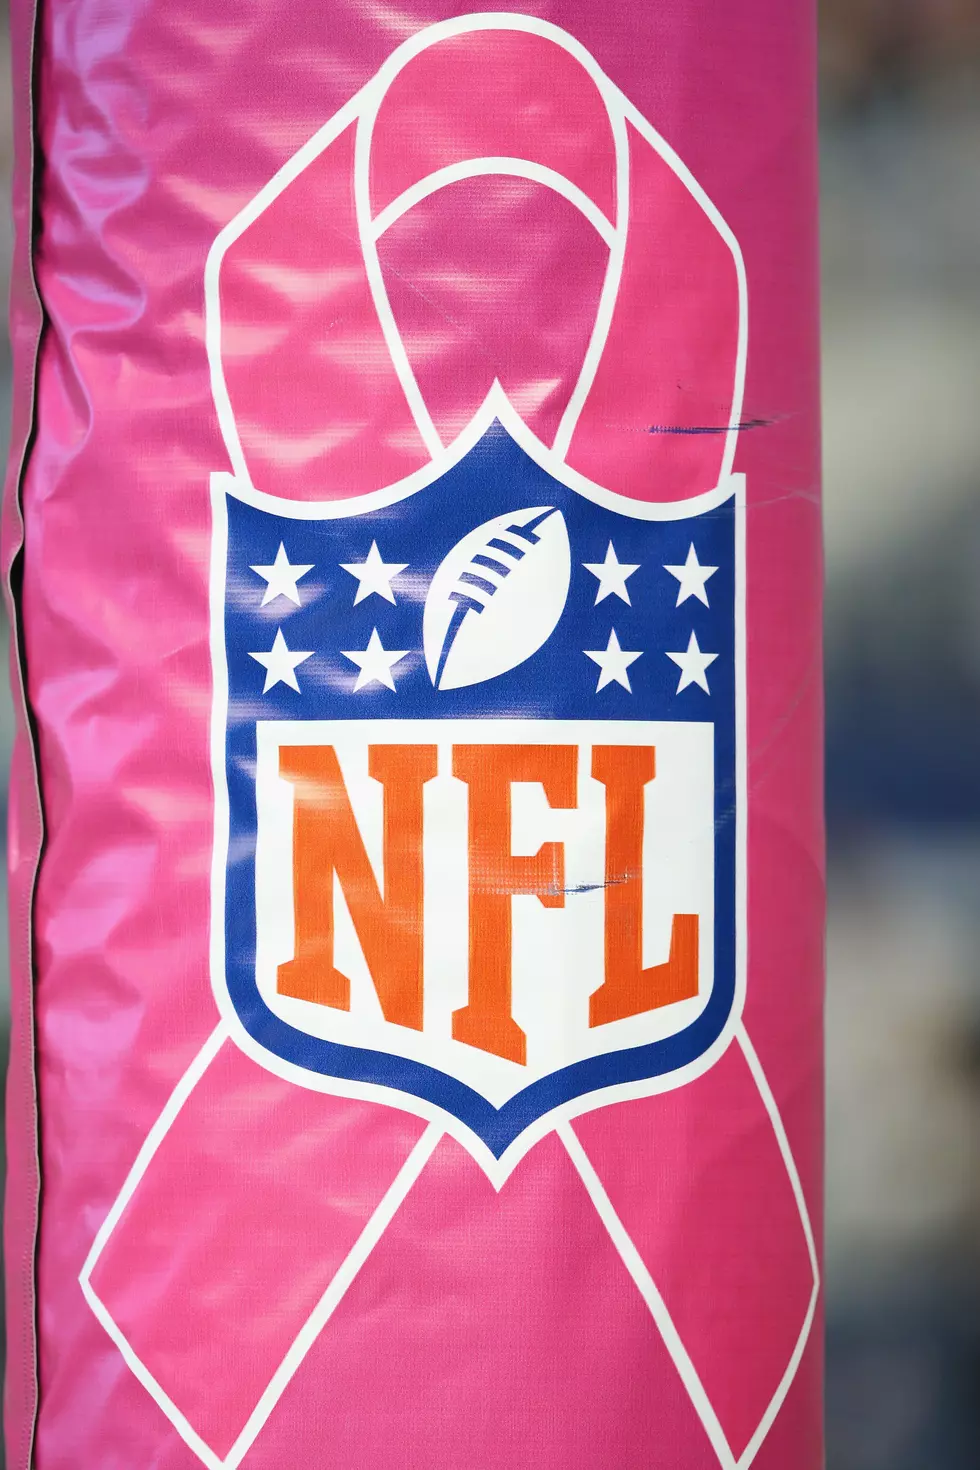 It Seems There Is Nothing But Drama Behind The Scenes At NFL Games [VIDEOS]